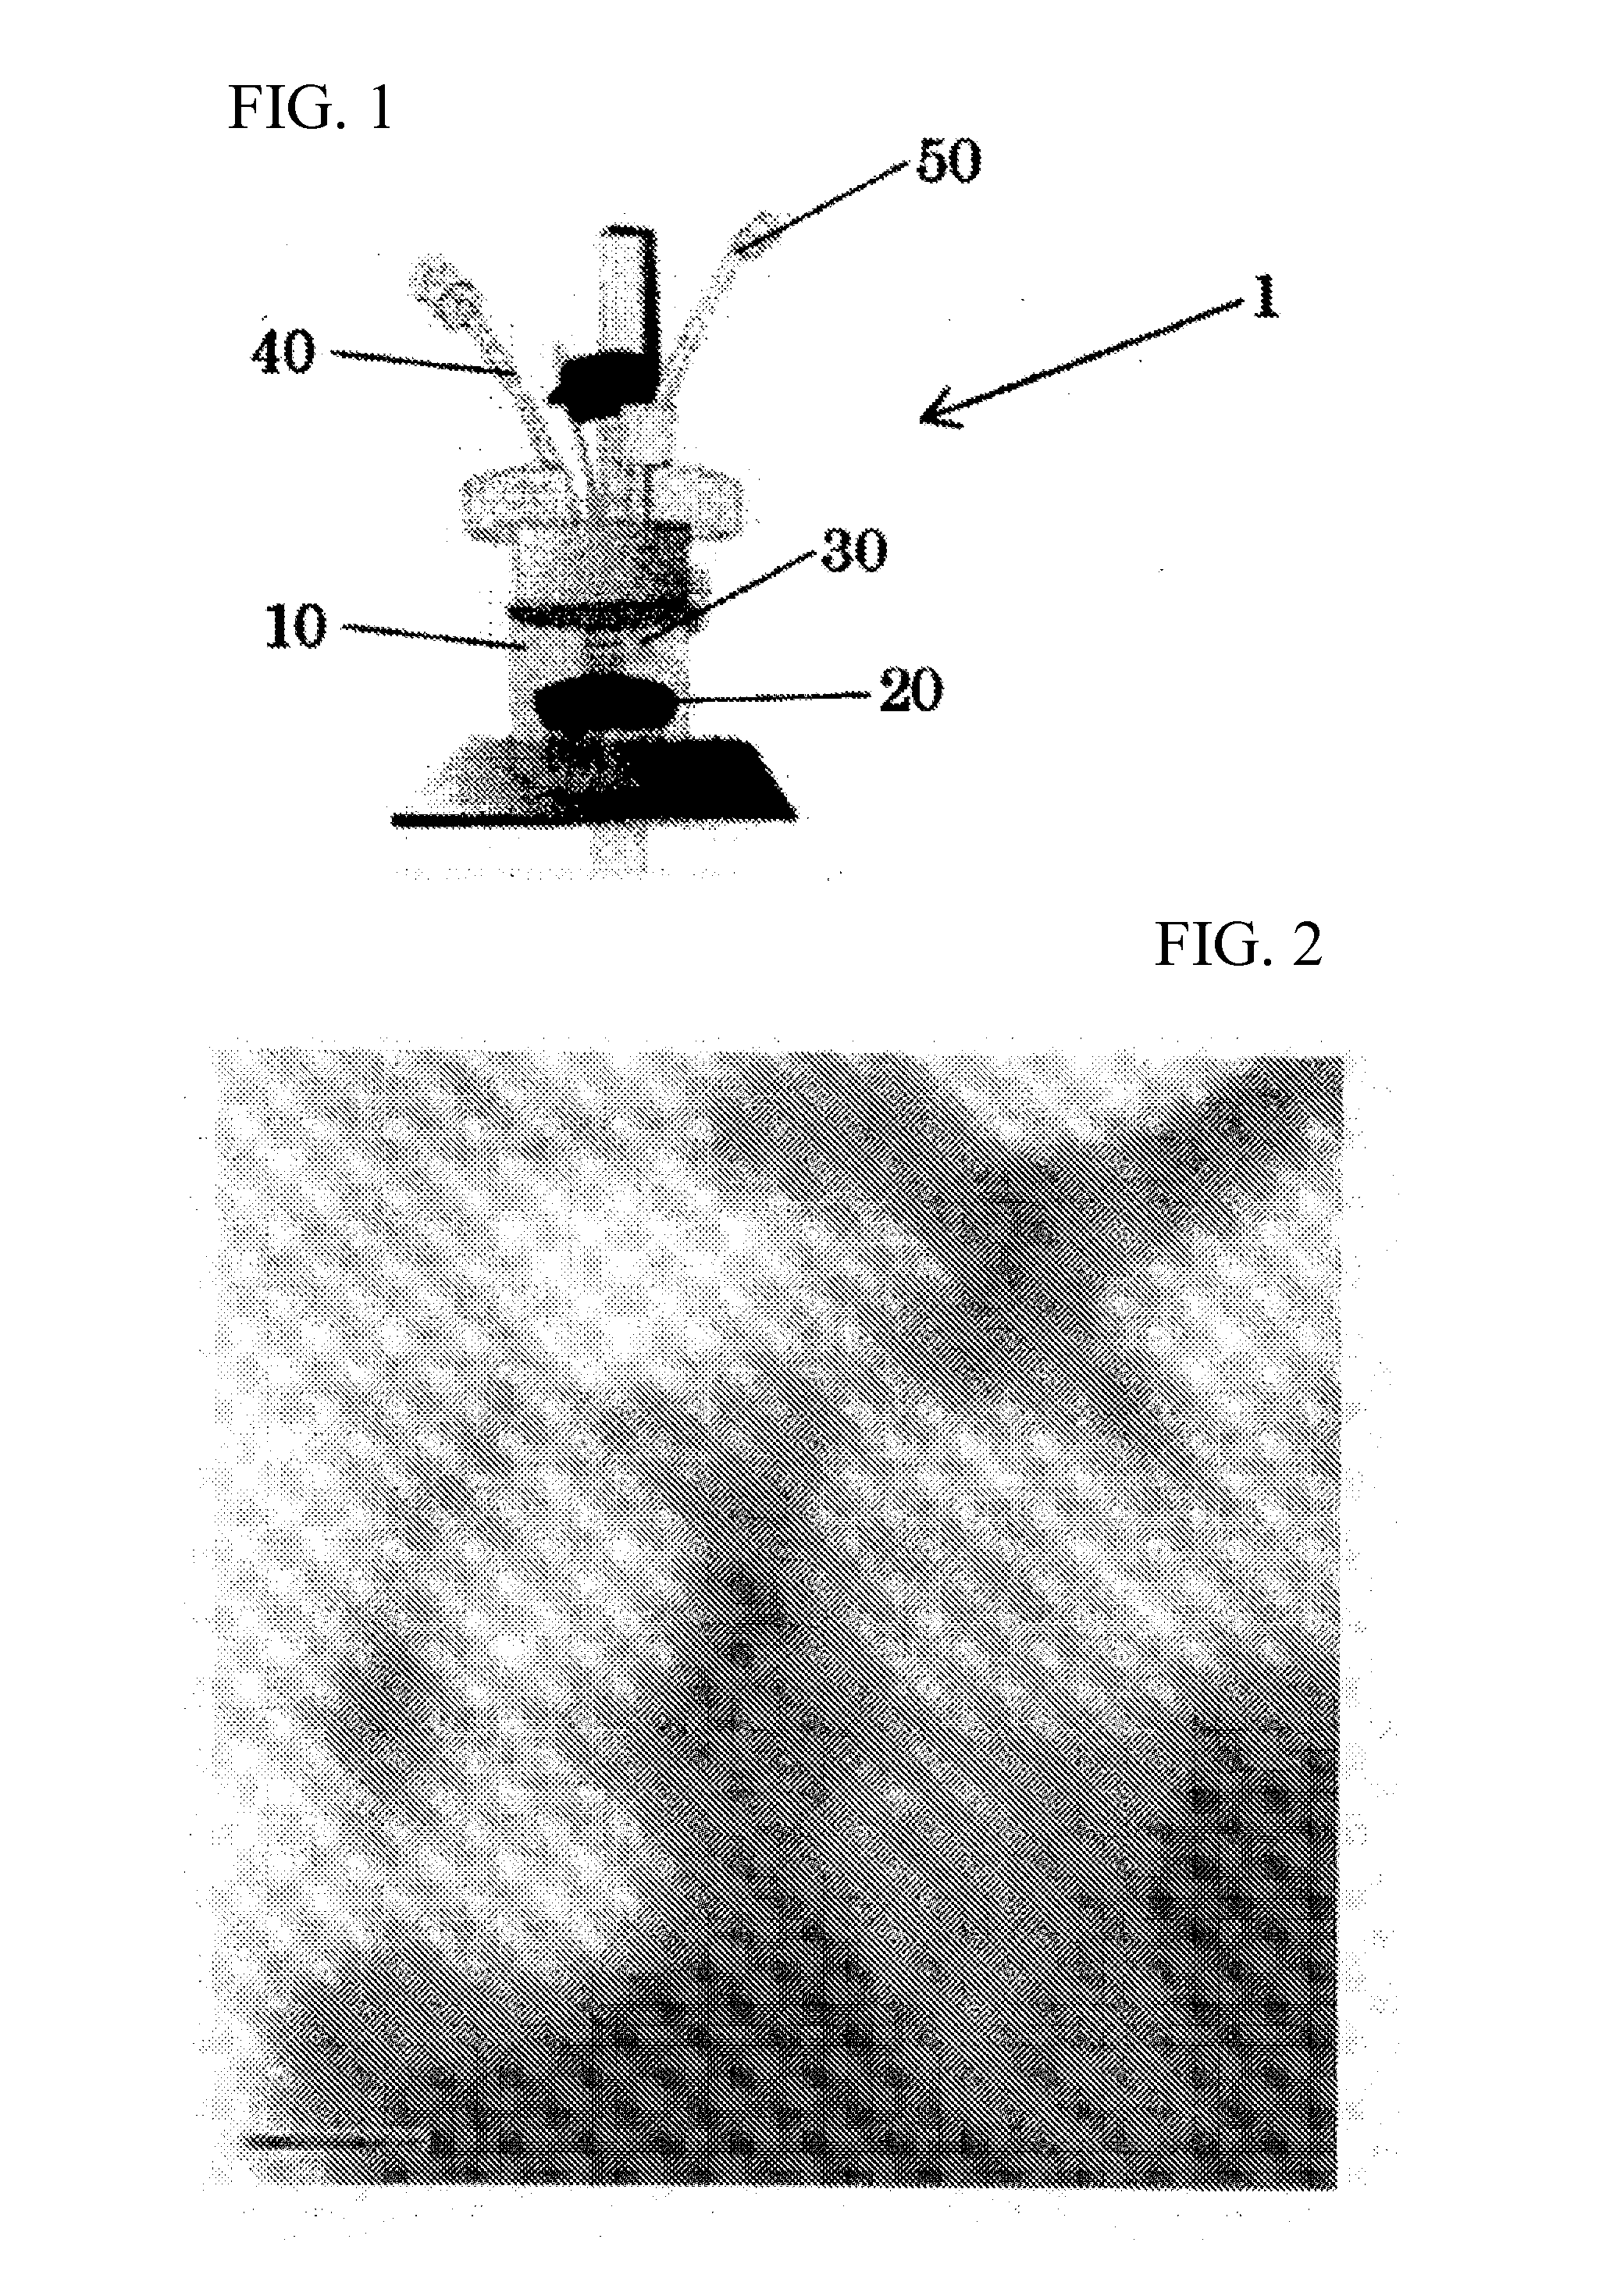 Gold cluster catalyst and method for producing same